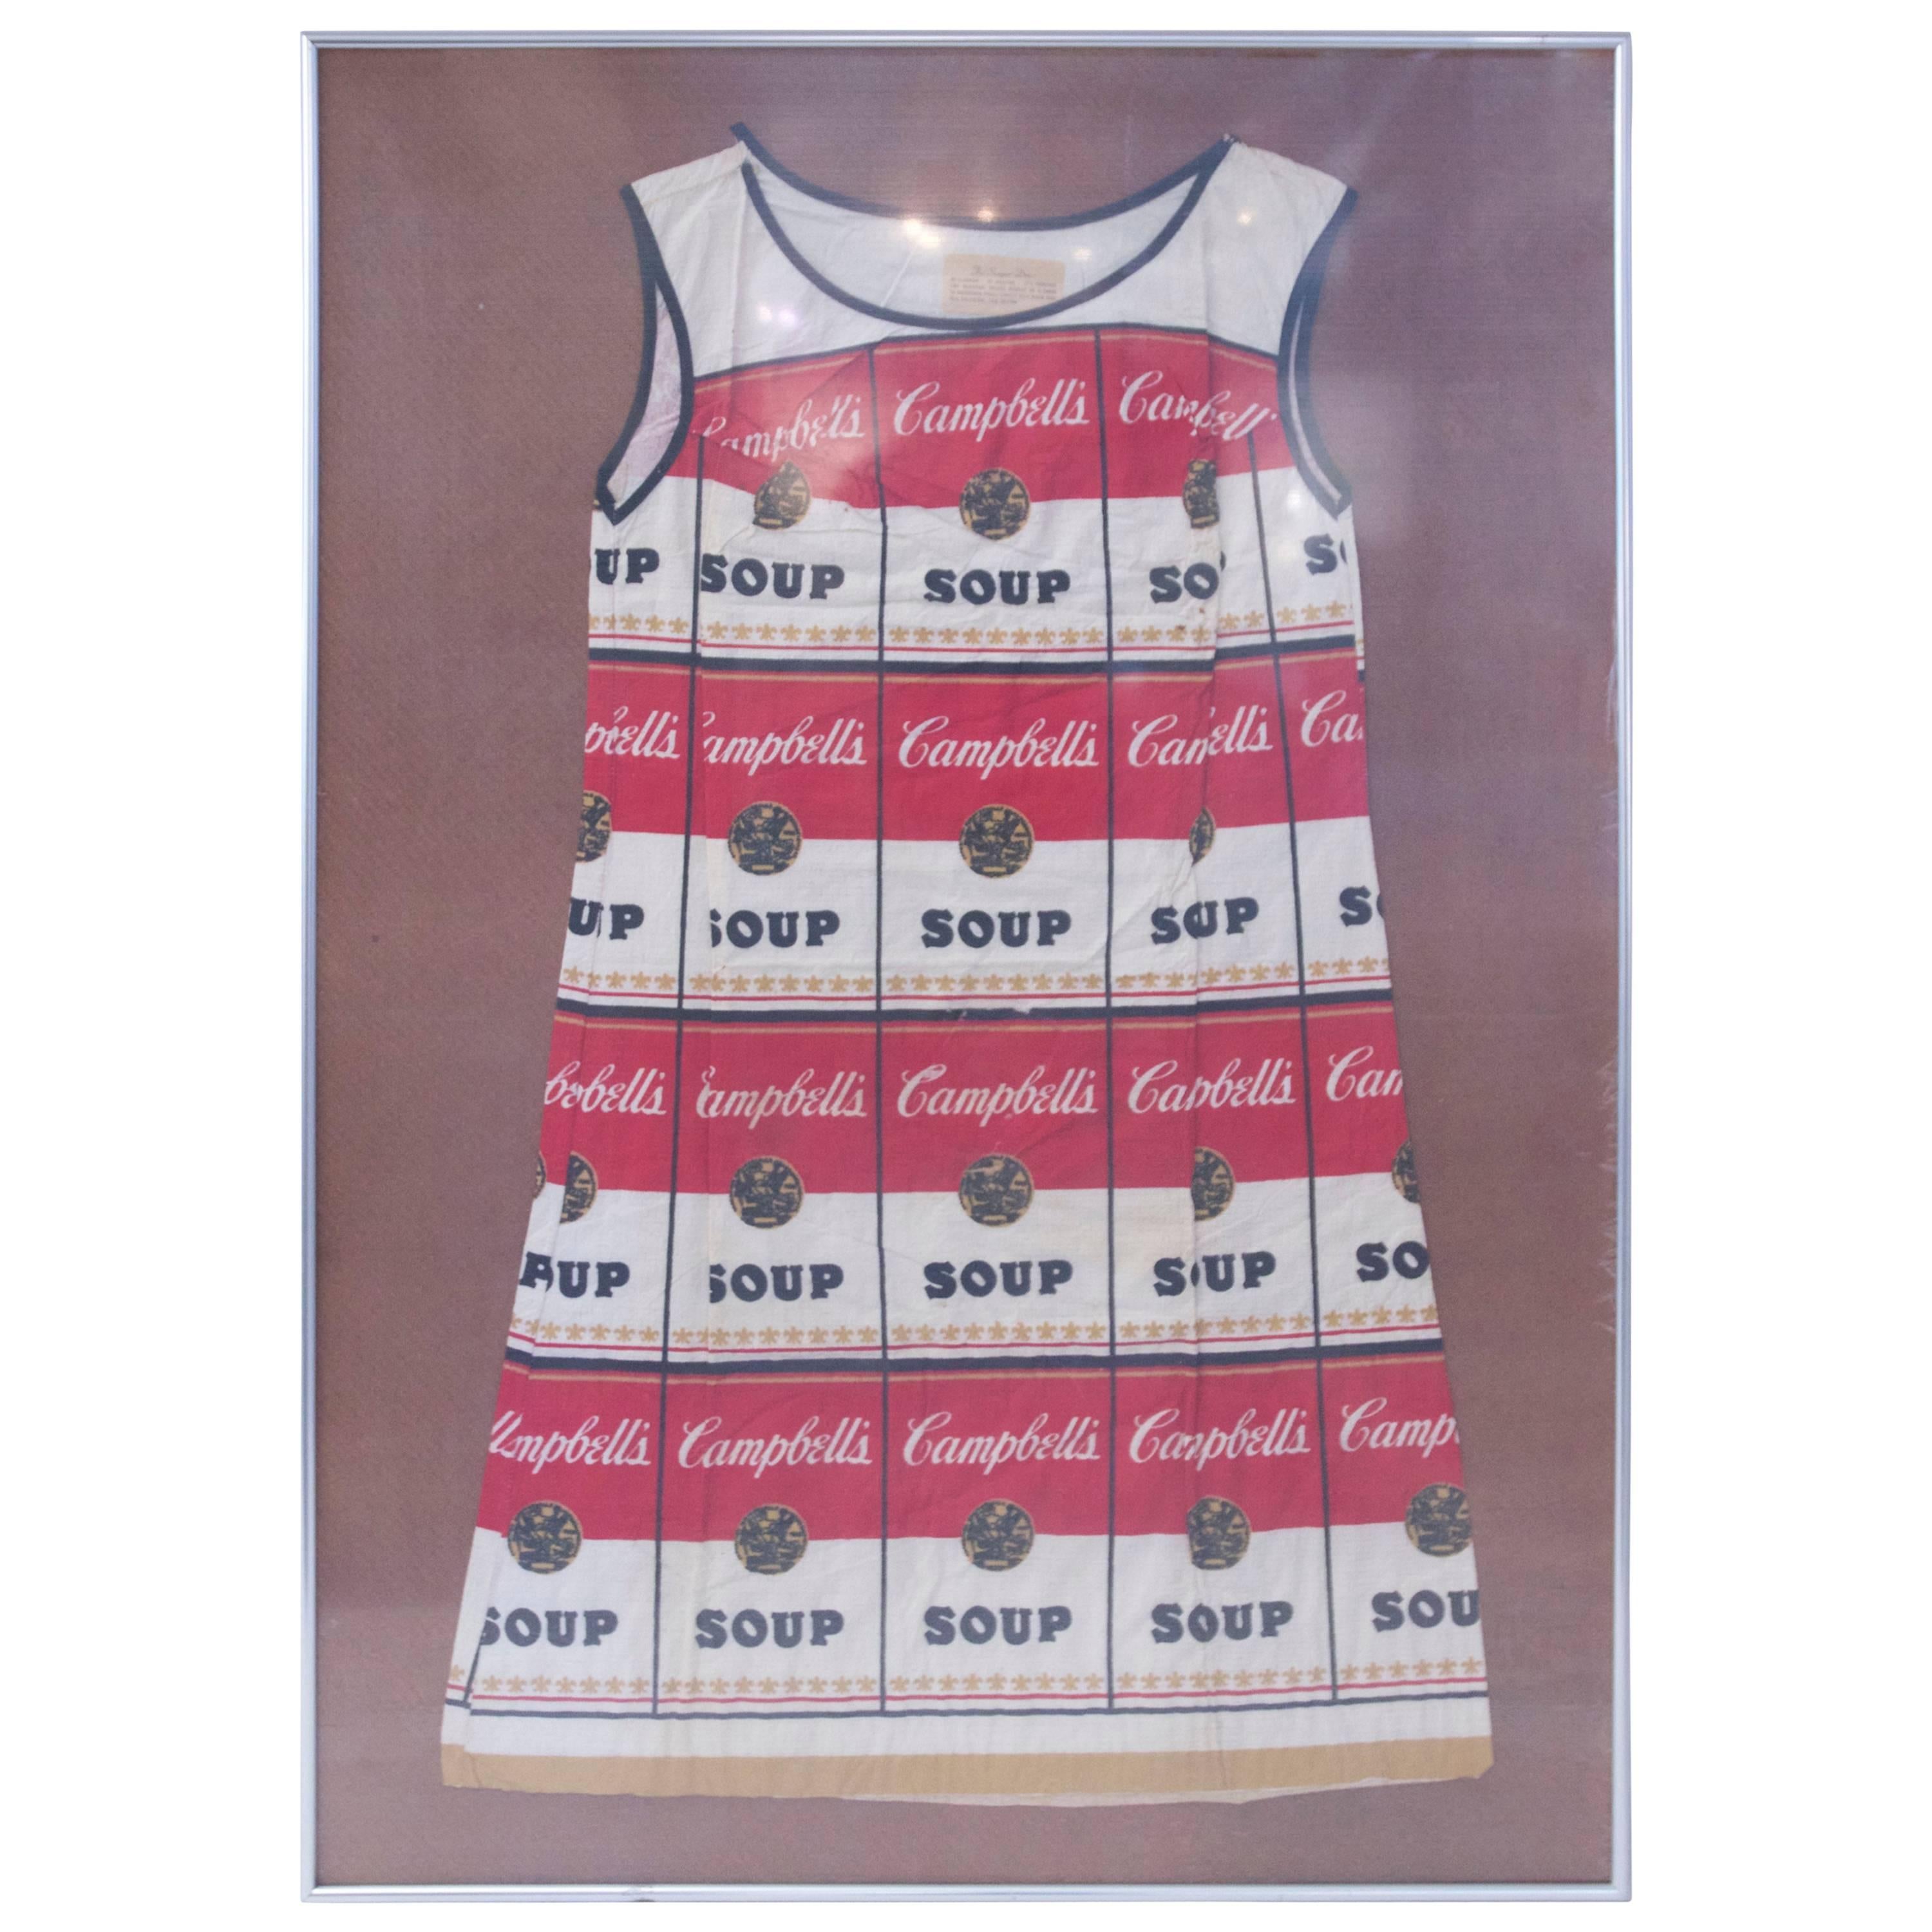 From after Andy Warhol, the Souper Dress, circa 1968